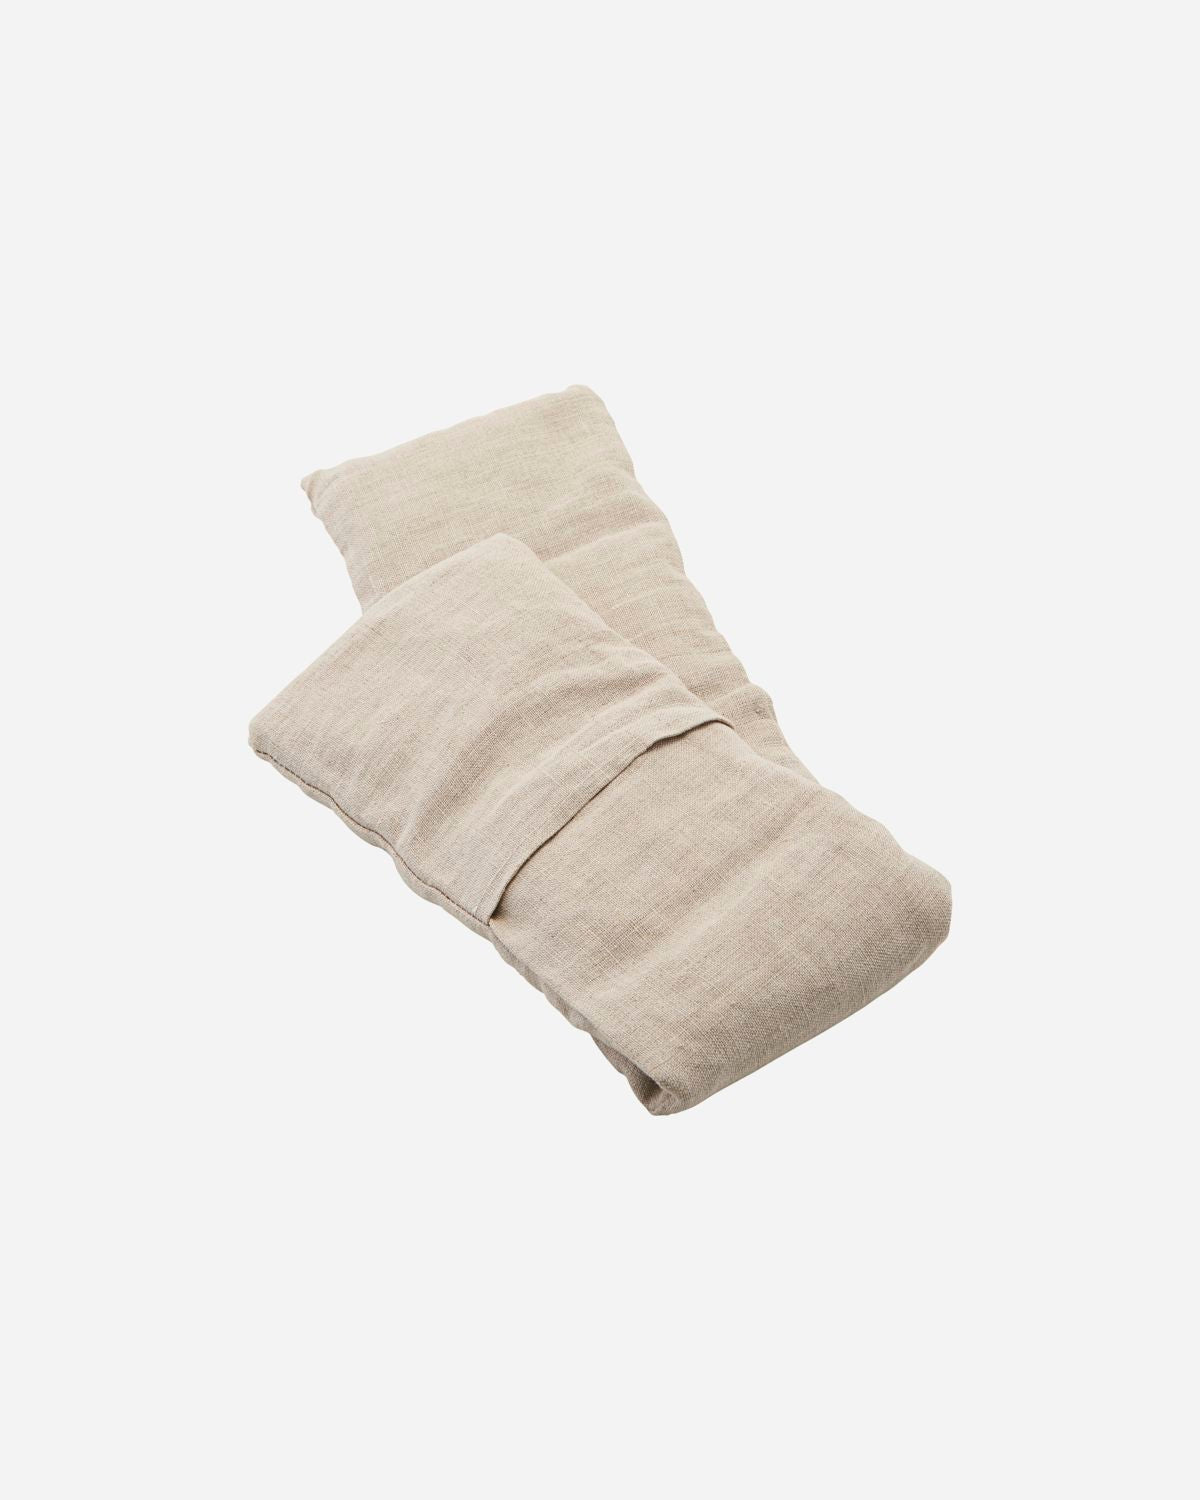 Linen Therapy Pillow